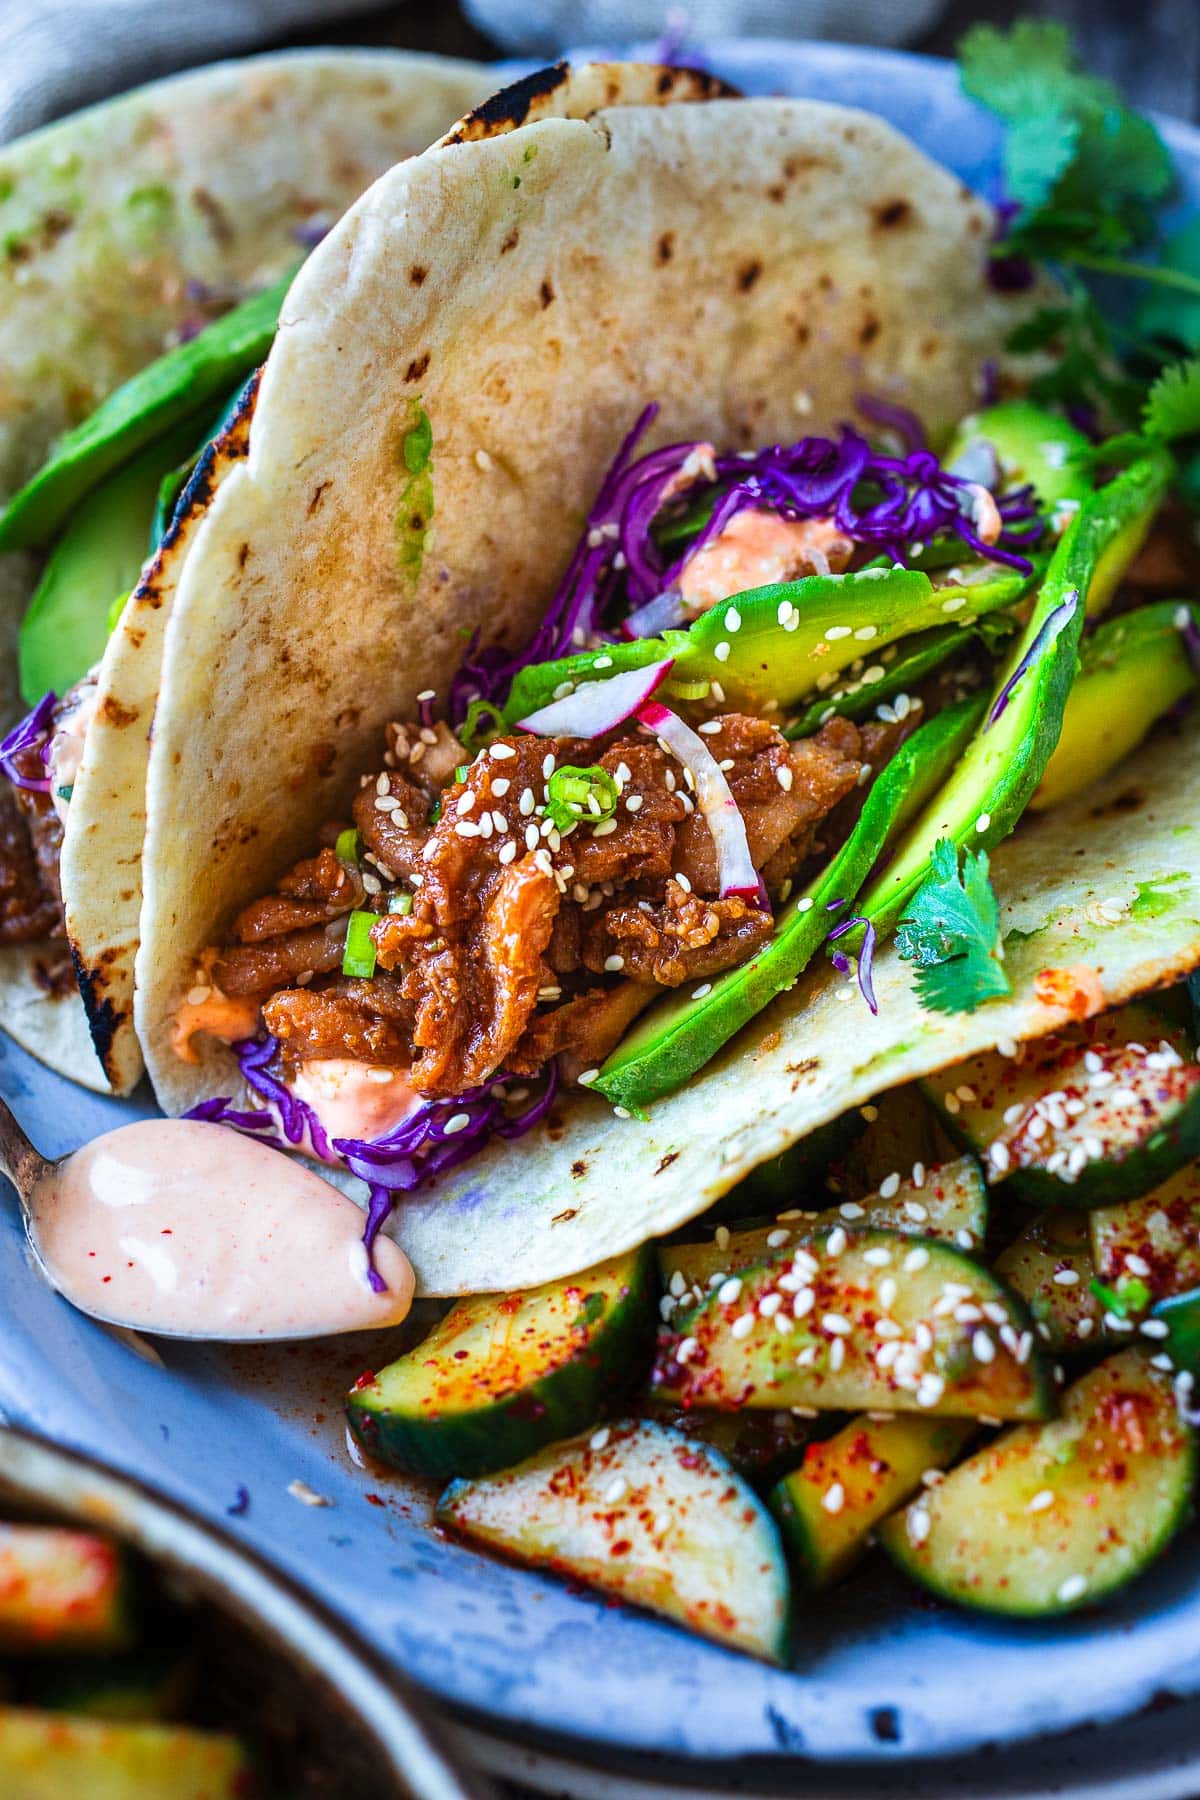 Take taco night to the next level!  Korean Tacos with chicken bulgogi are so incredibly flavorful-succulent, marinated chicken is sauteed until tender and topped with fresh avocado, cabbage, and a creamy gochujang taco sauce. 